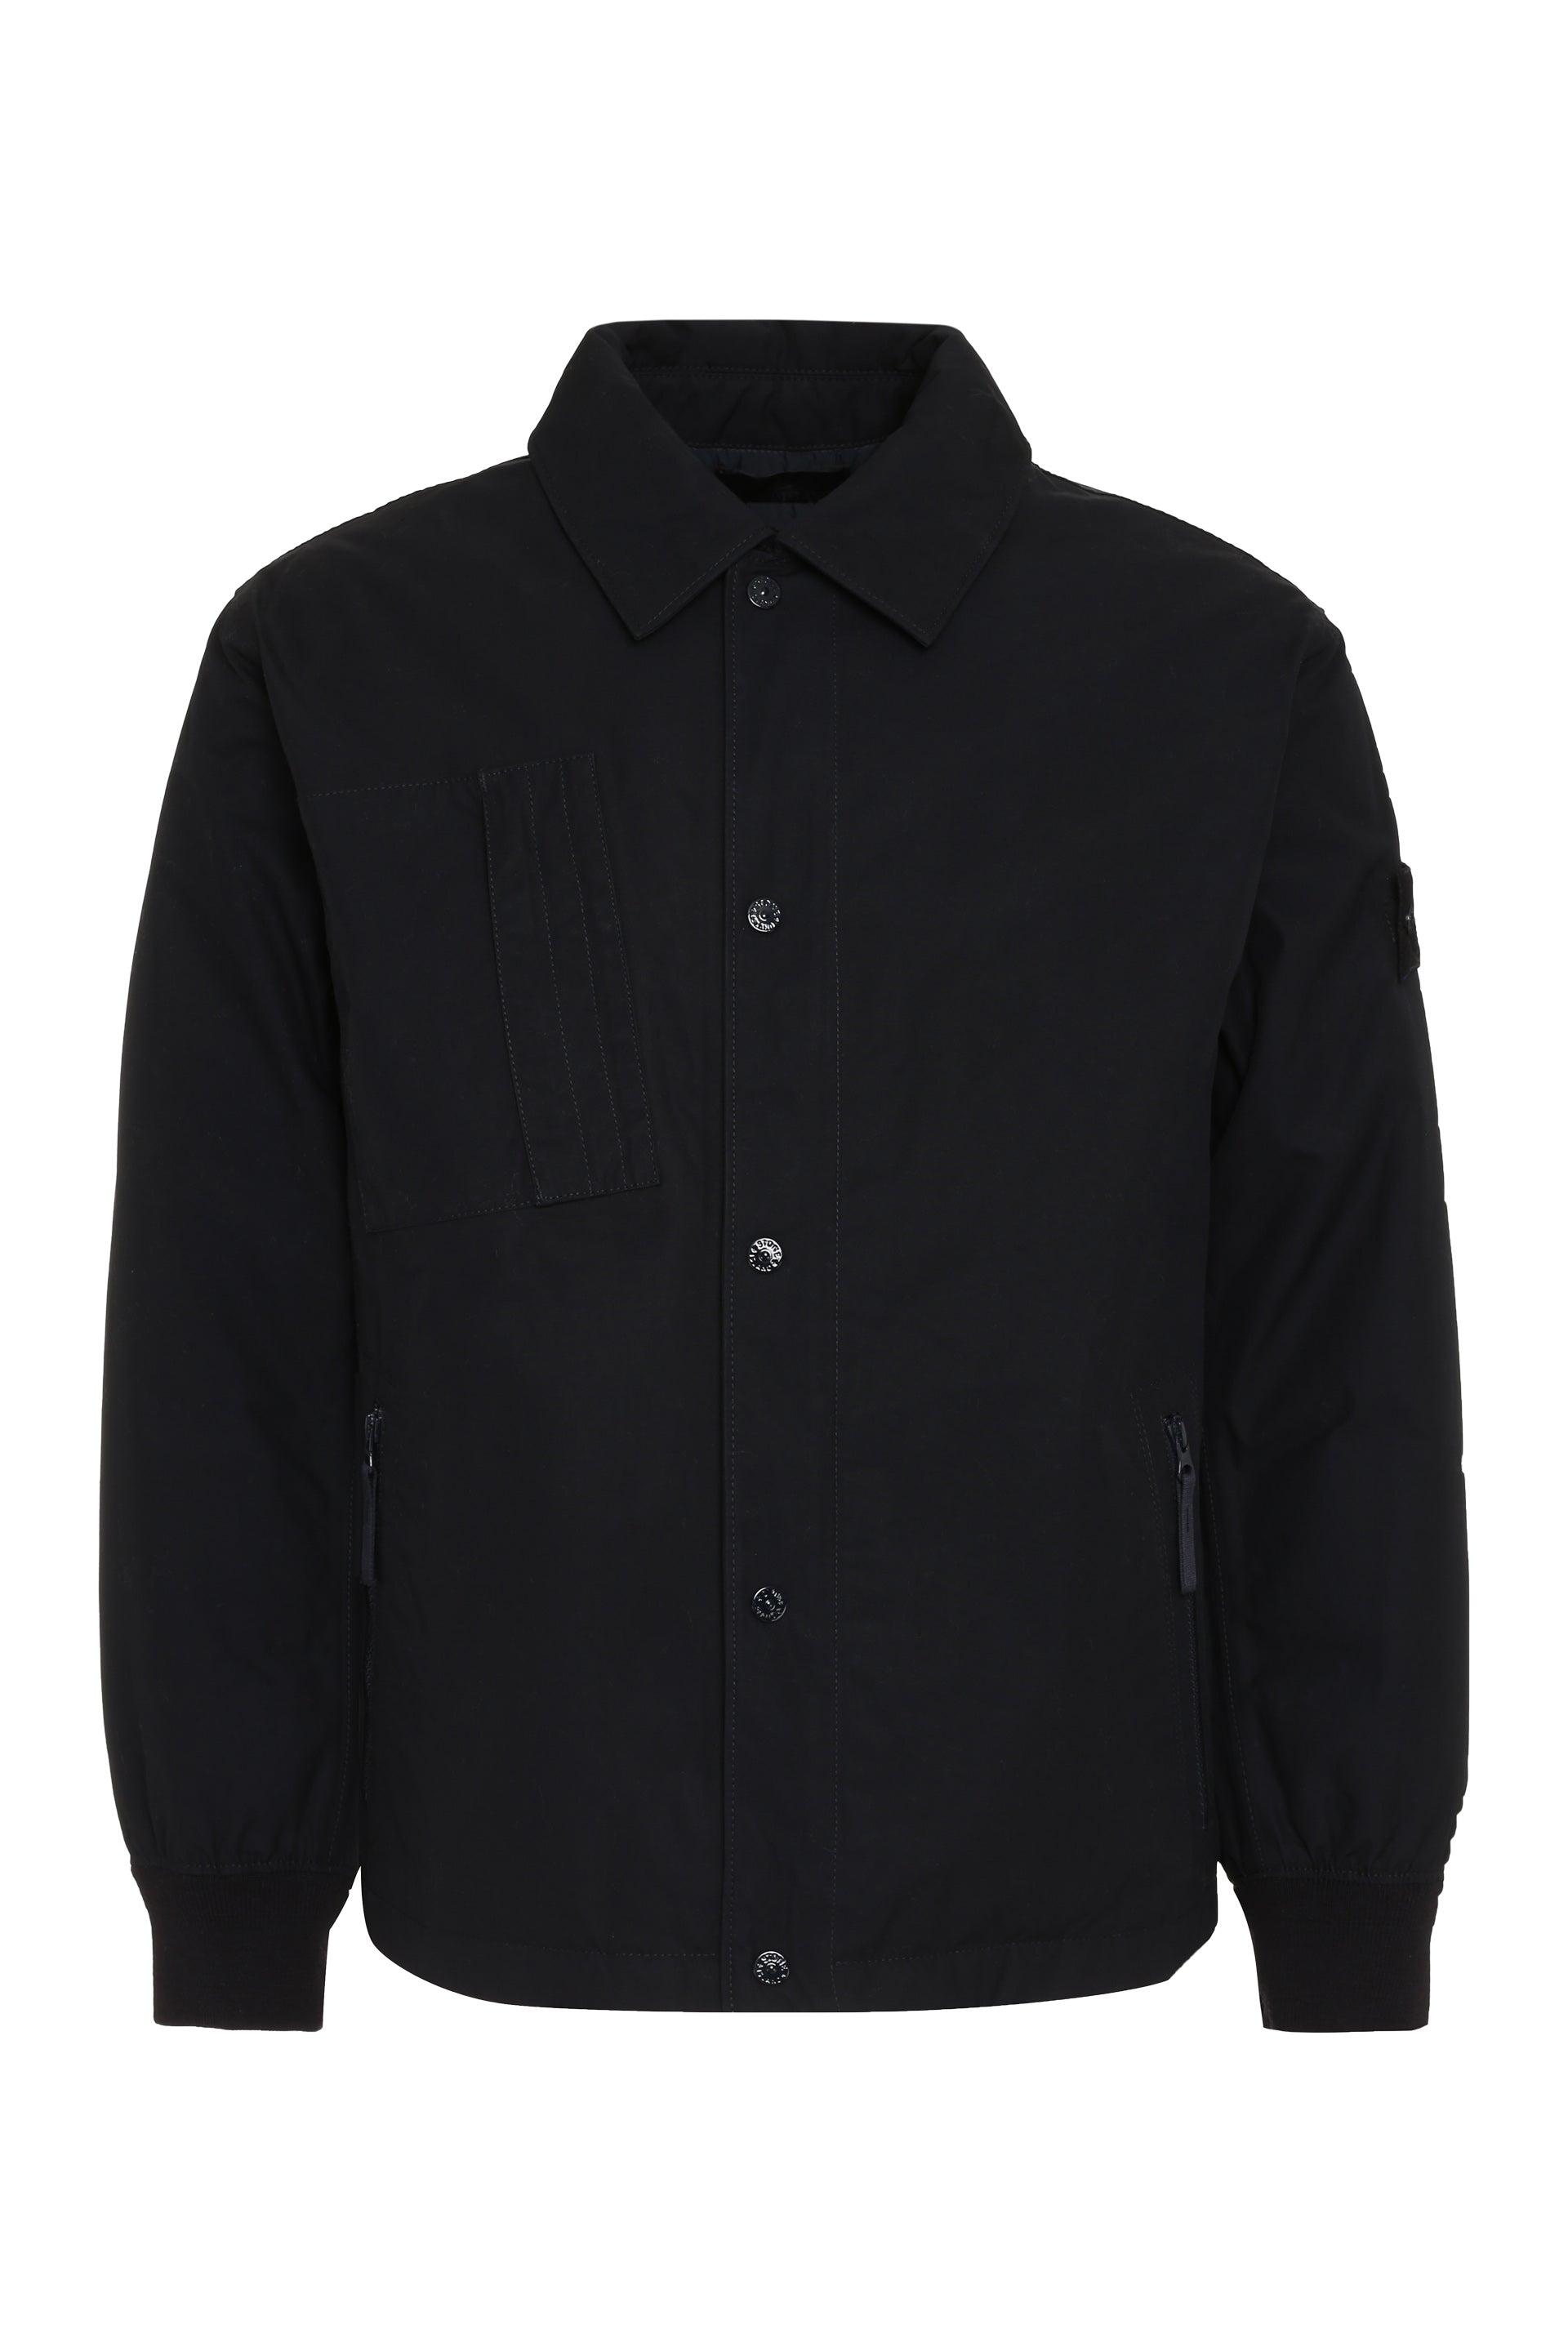 Stone Island Cotton Bomber Jacket in Black for Men | Lyst